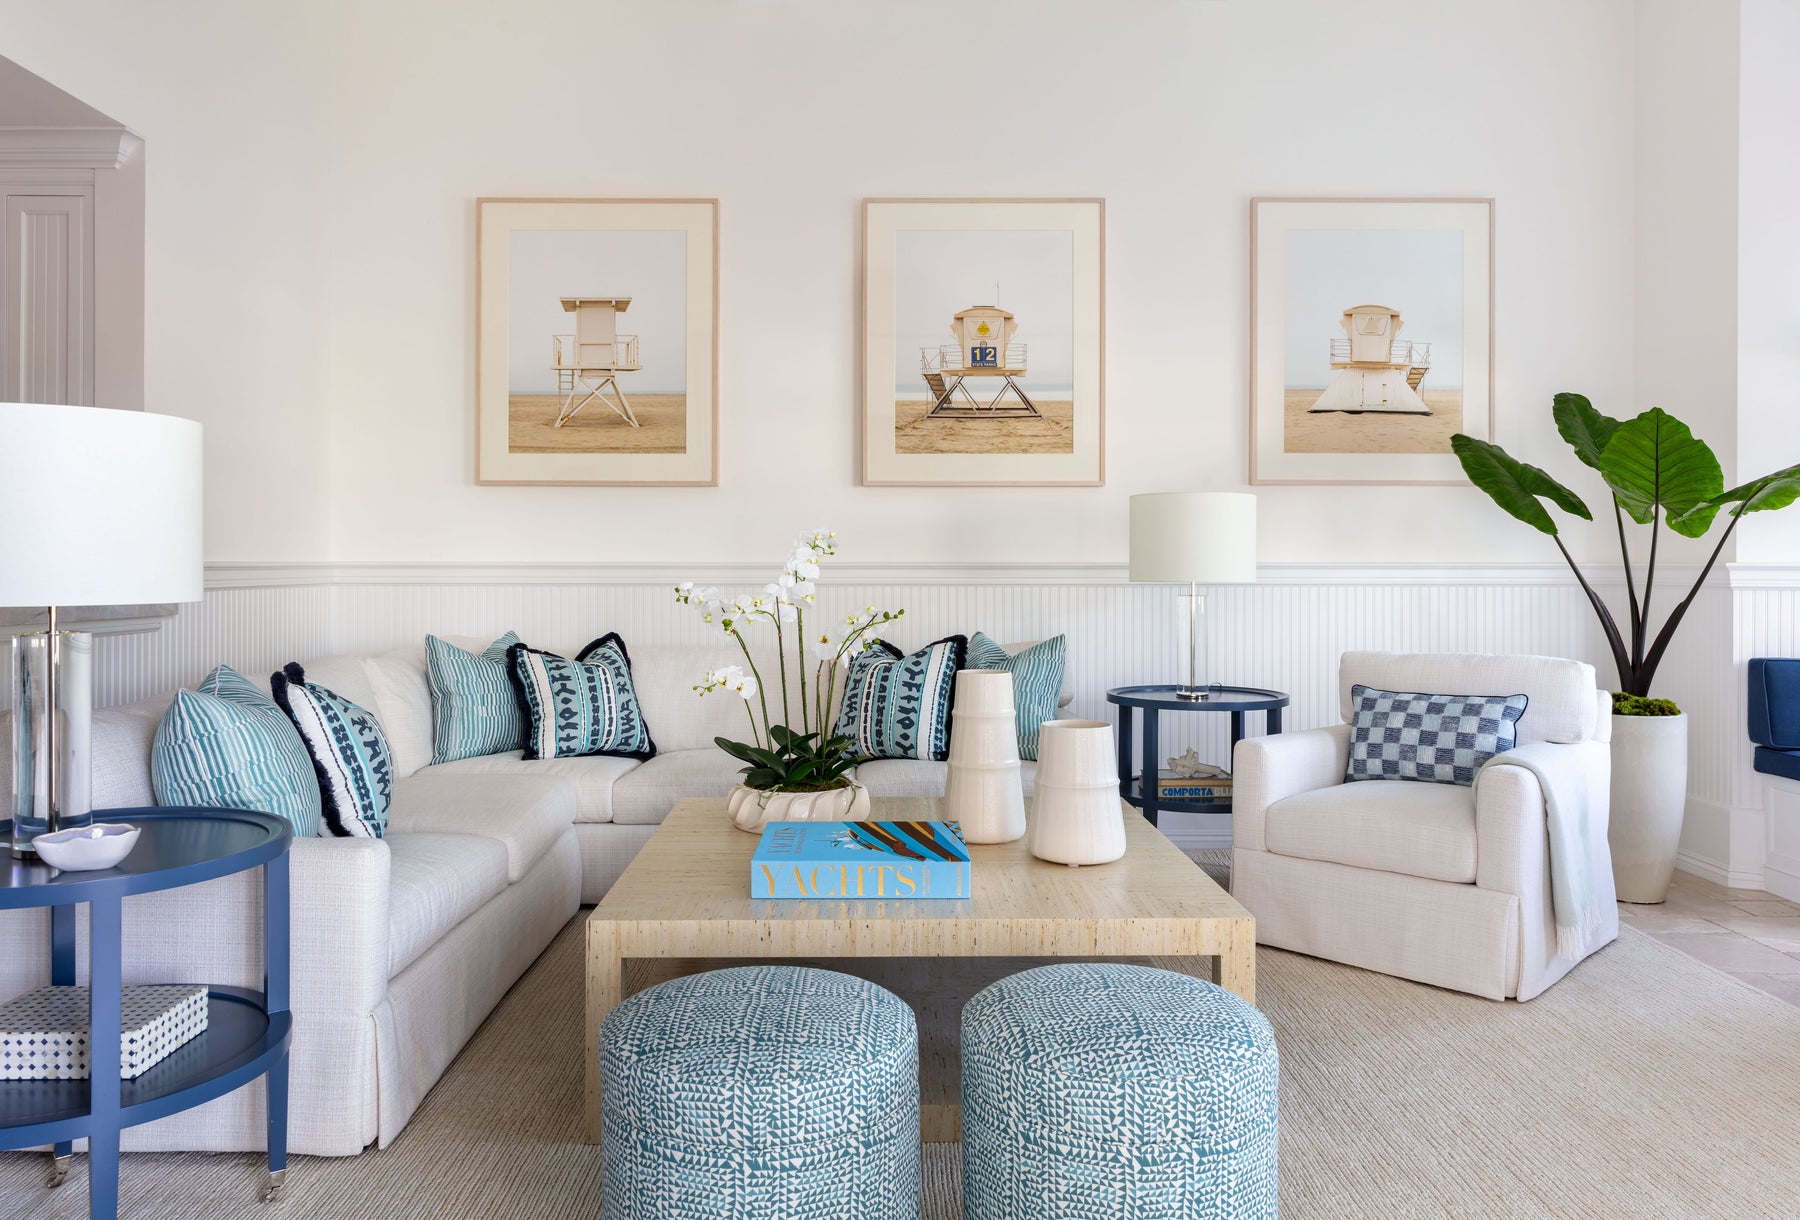 living area with large white sectional, blue patterned pillows, large neutral coffee table, coordinating upholstered blue stools and paintings on wall of beach lifeguard stands